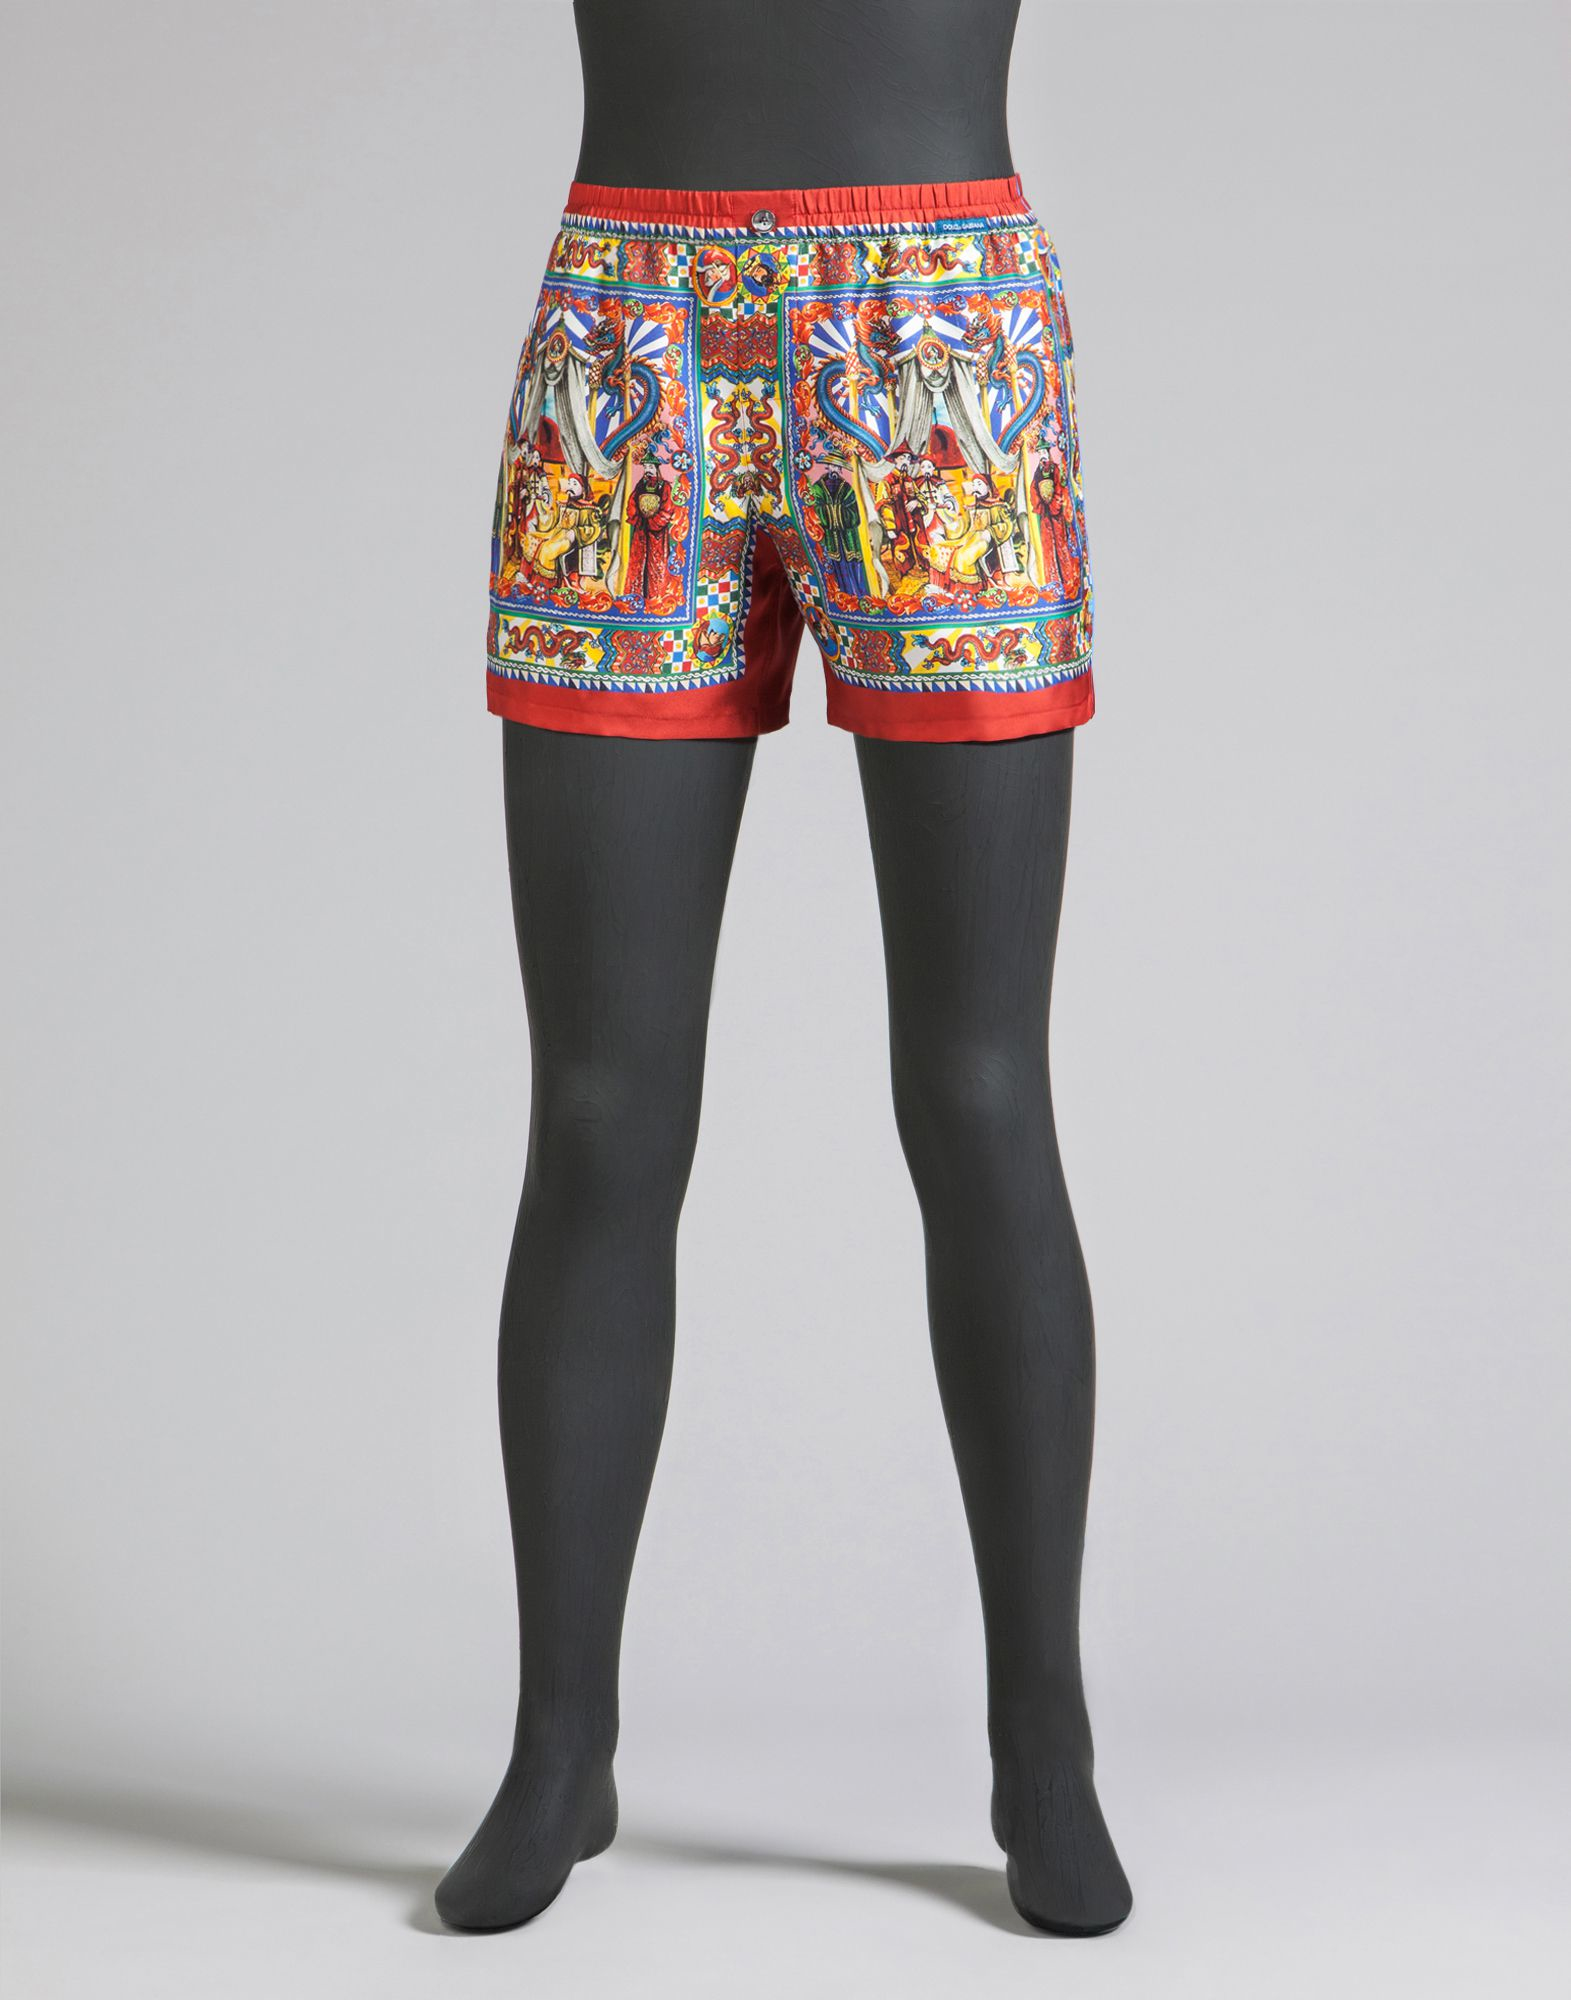 Dolce & Gabbana Pajama Shorts In Printed Silk in Red for Men - Lyst